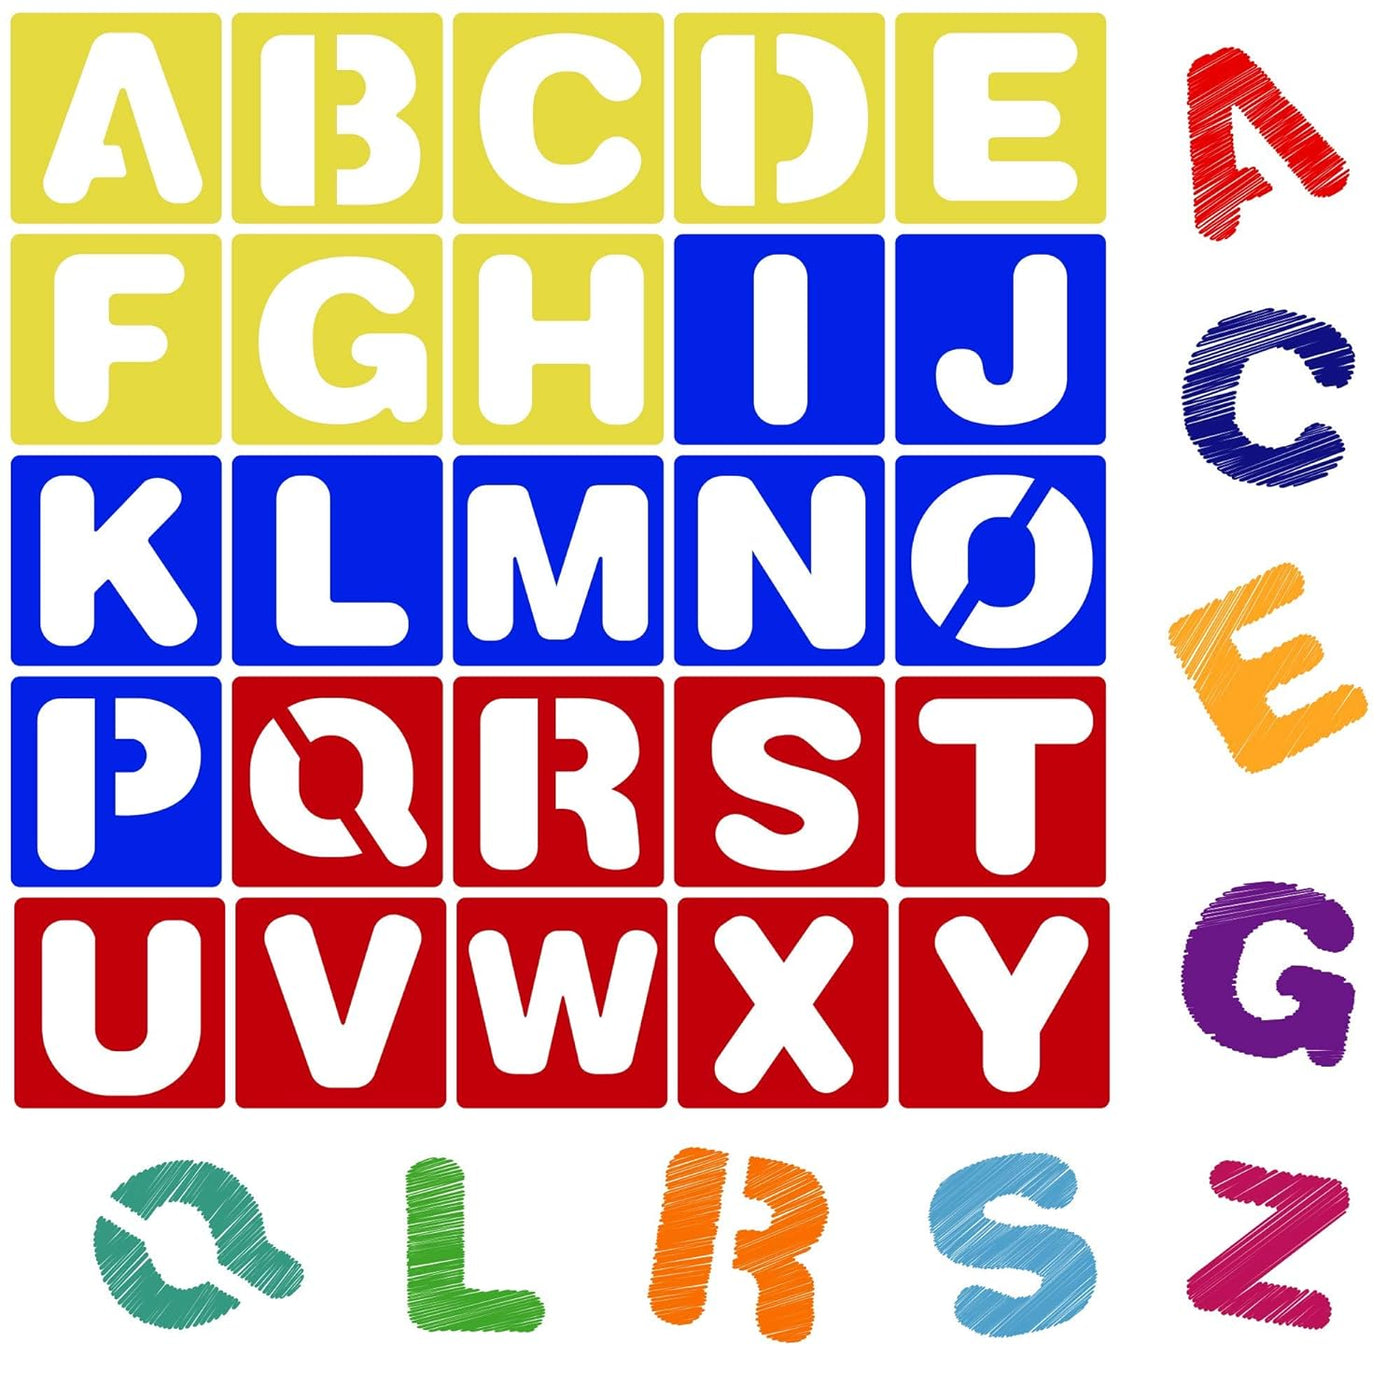 Alphabet Letter Stencil Set for Kids and Adults - Painting, Lettering and Drawing Templates - Large Plastic ABC Stencils for Protest Posters, Arts and Crafts Projects - 4 Inch